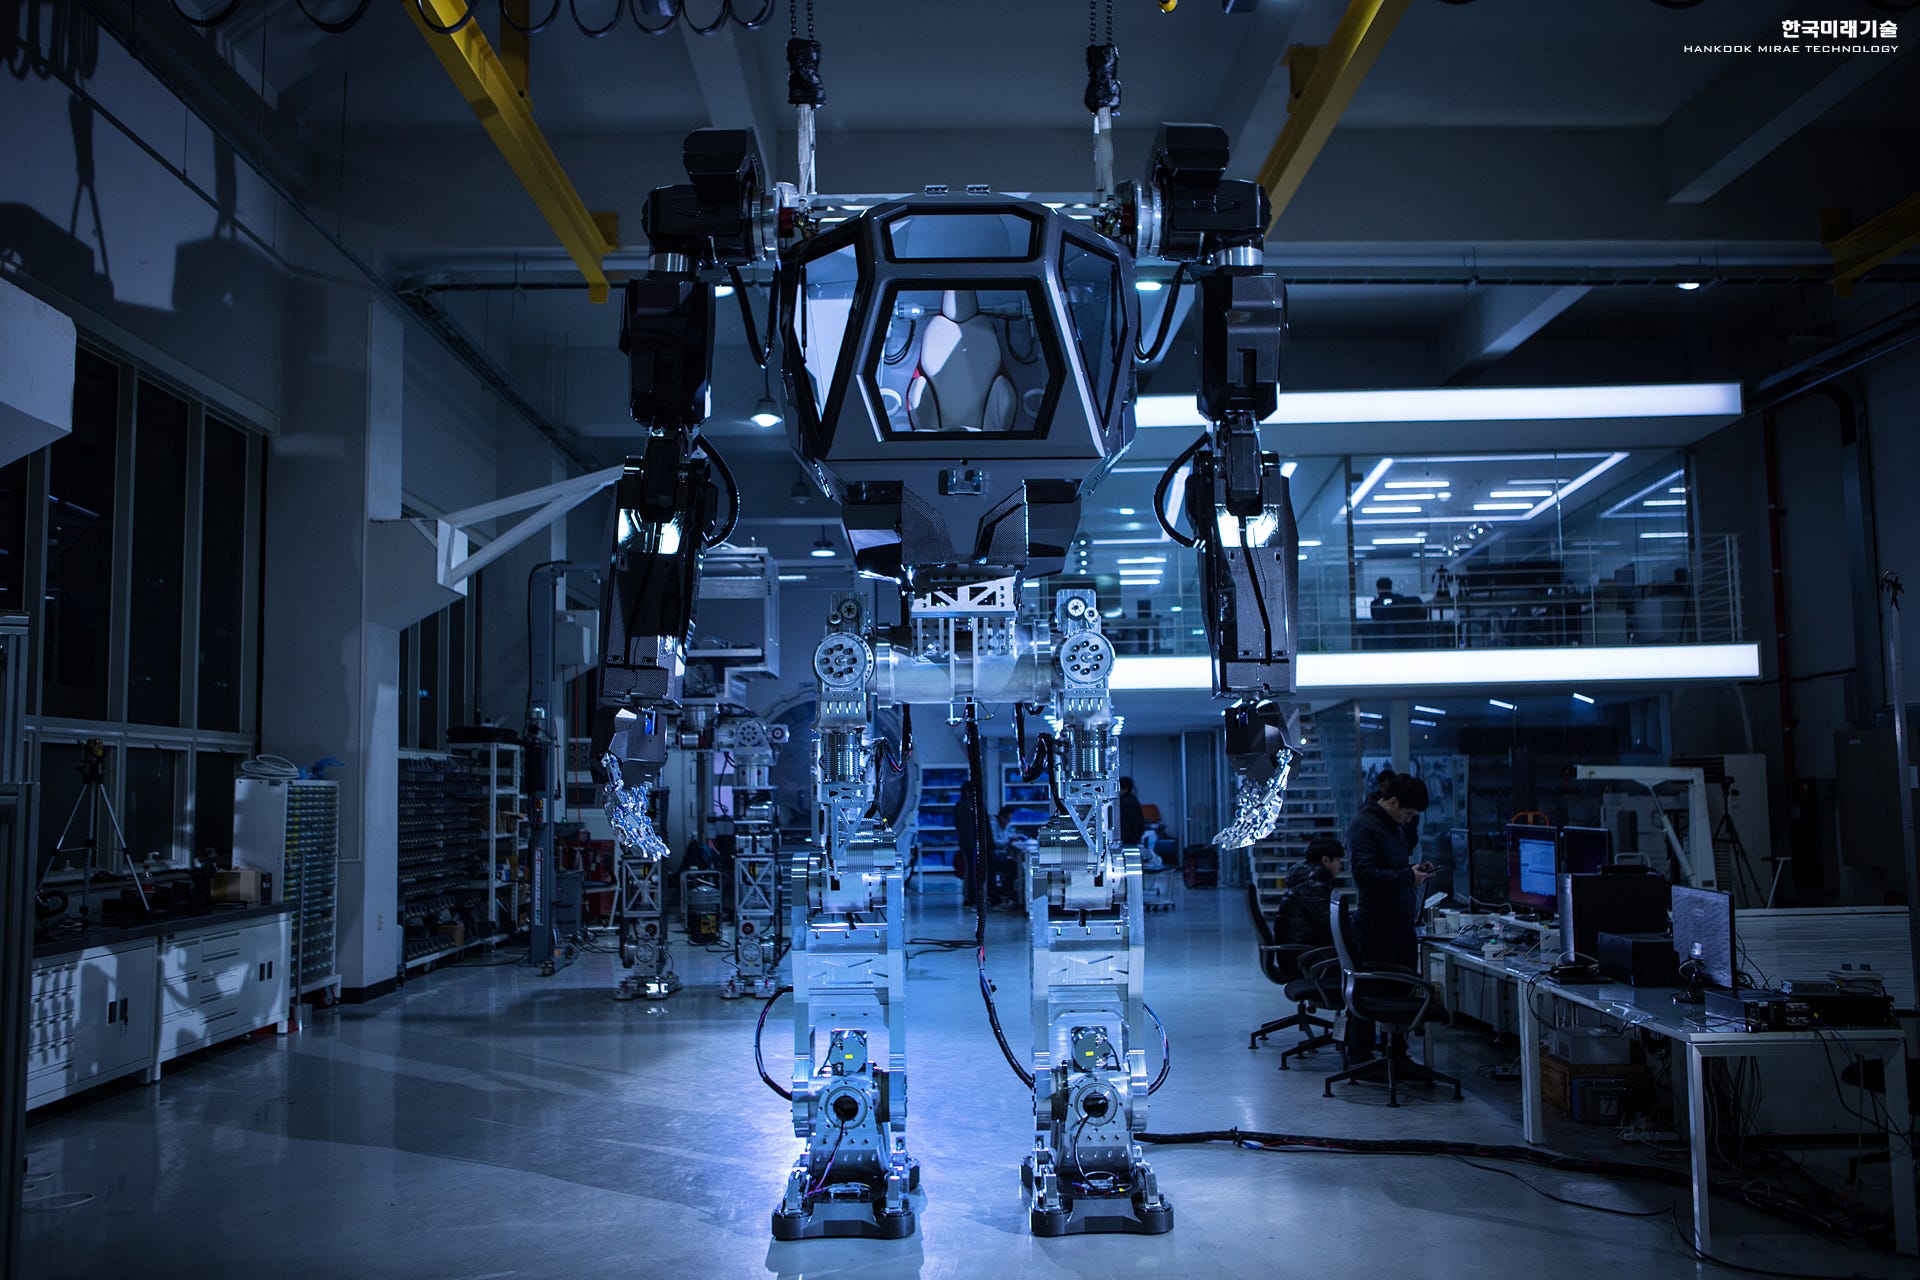 The First Cyber Trooper: Giant Manned Robot Method-2 Walks Like A Human.